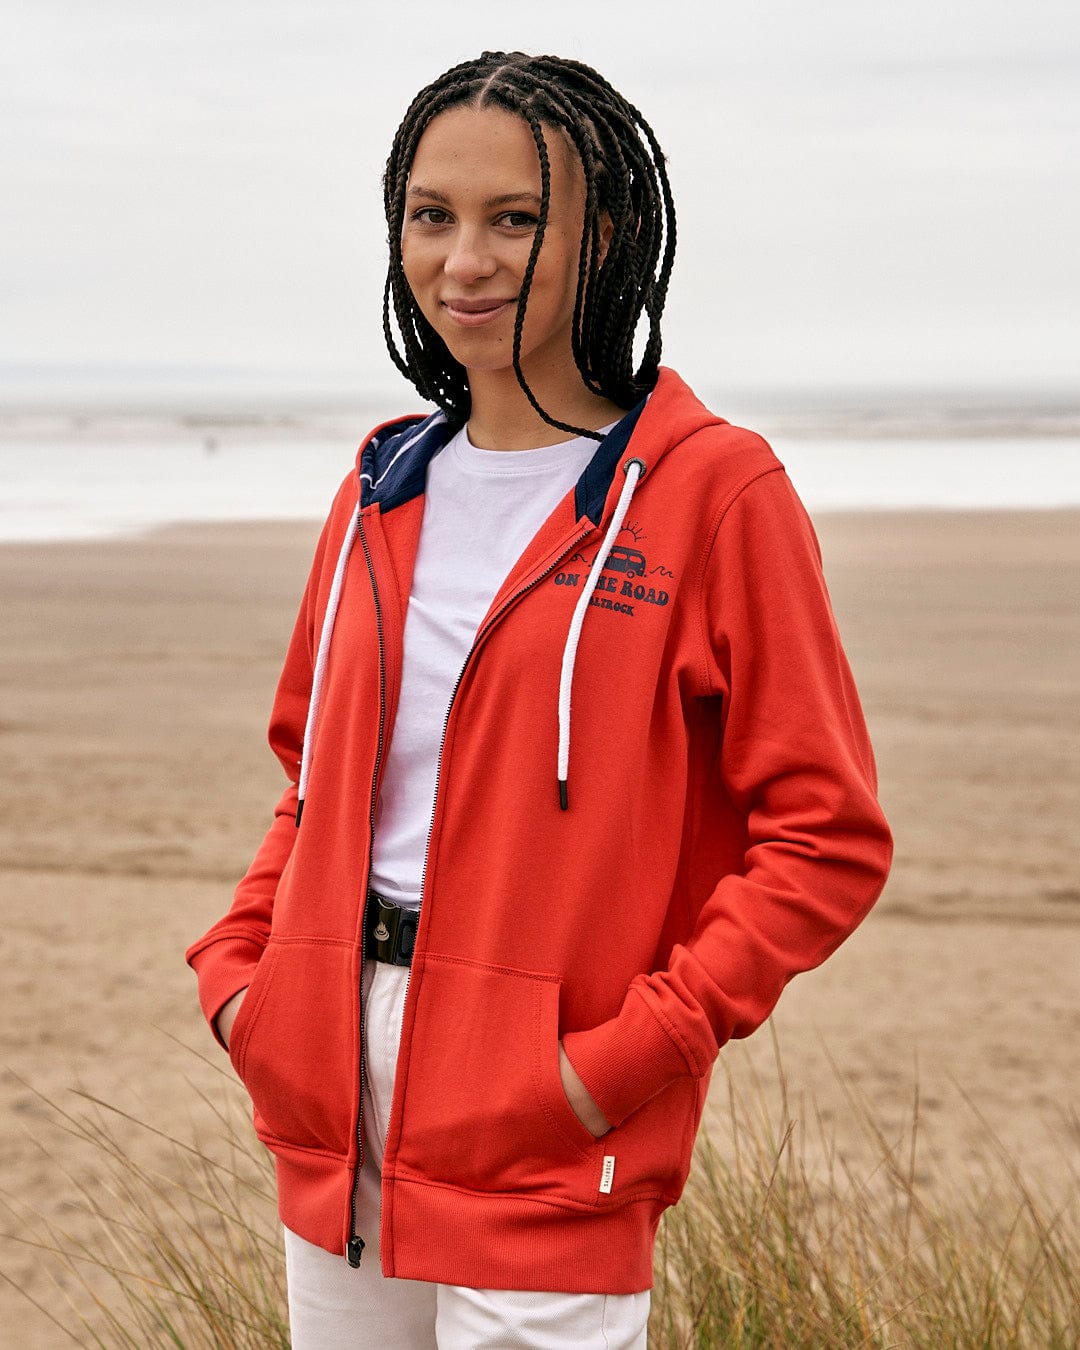 A woman in a Saltrock On The Road Wales - Womes Zip Hoodie - Red standing on a beach.